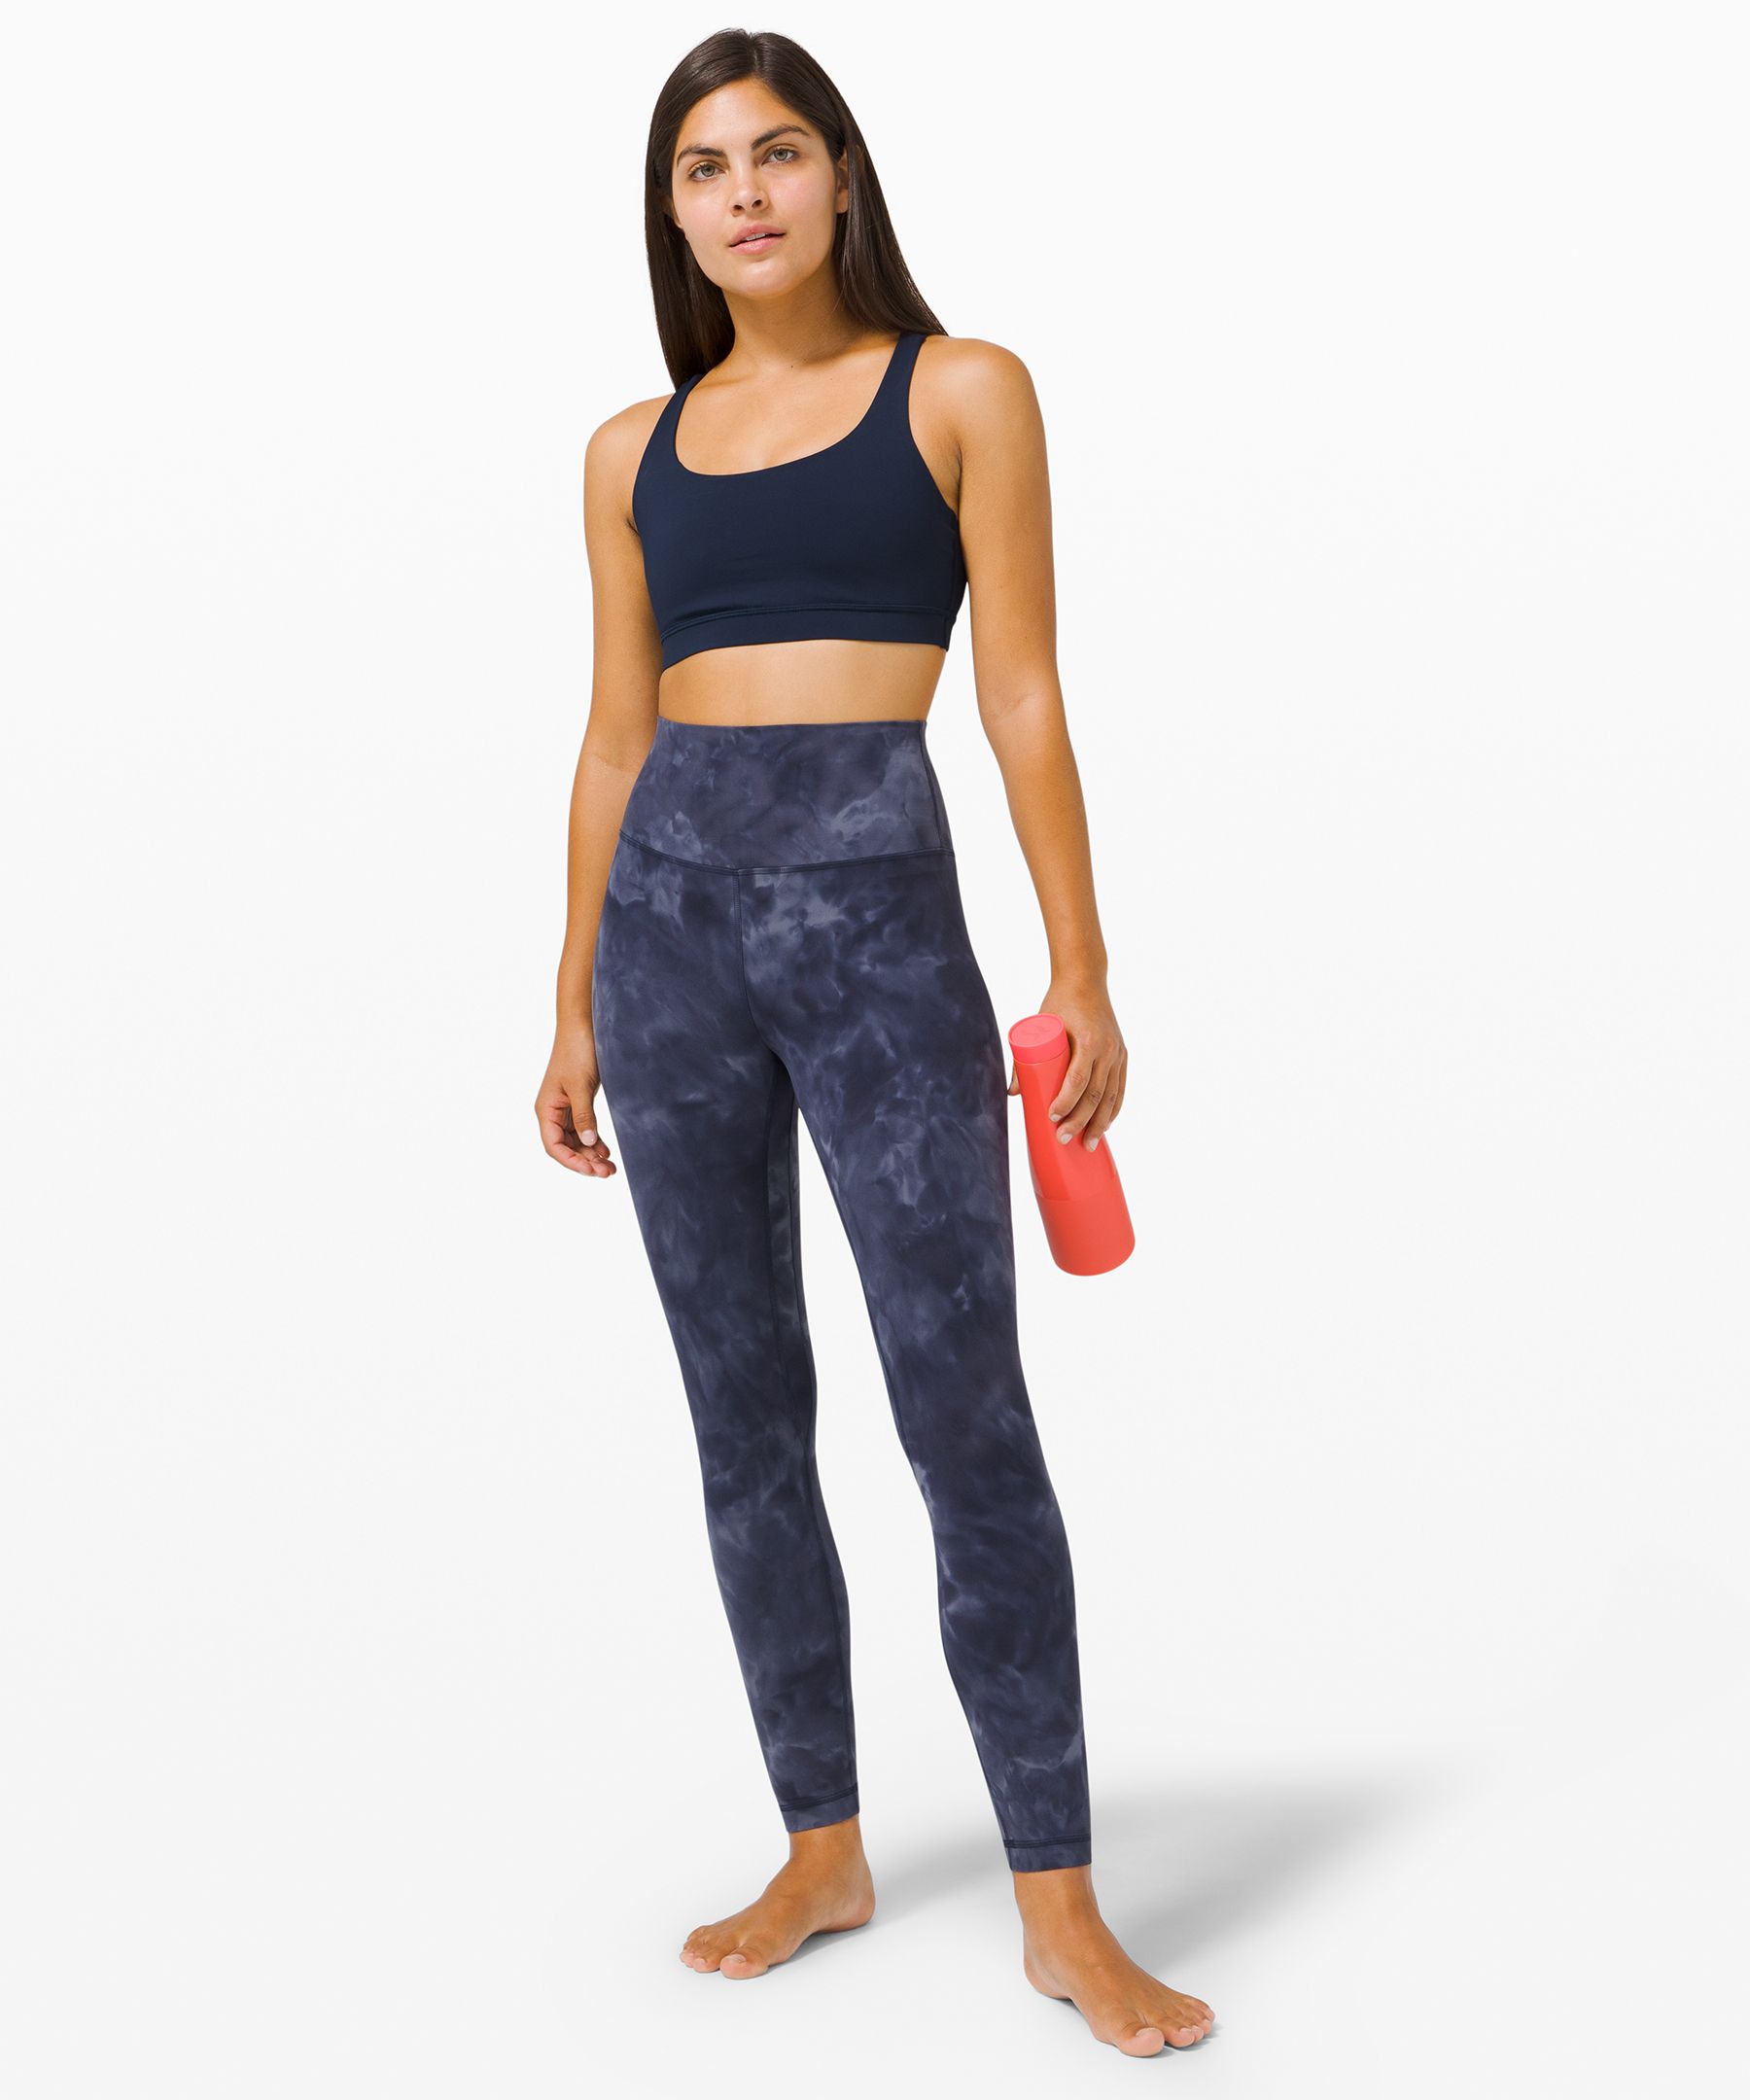 What Lulu Leggings Have The Most Compression